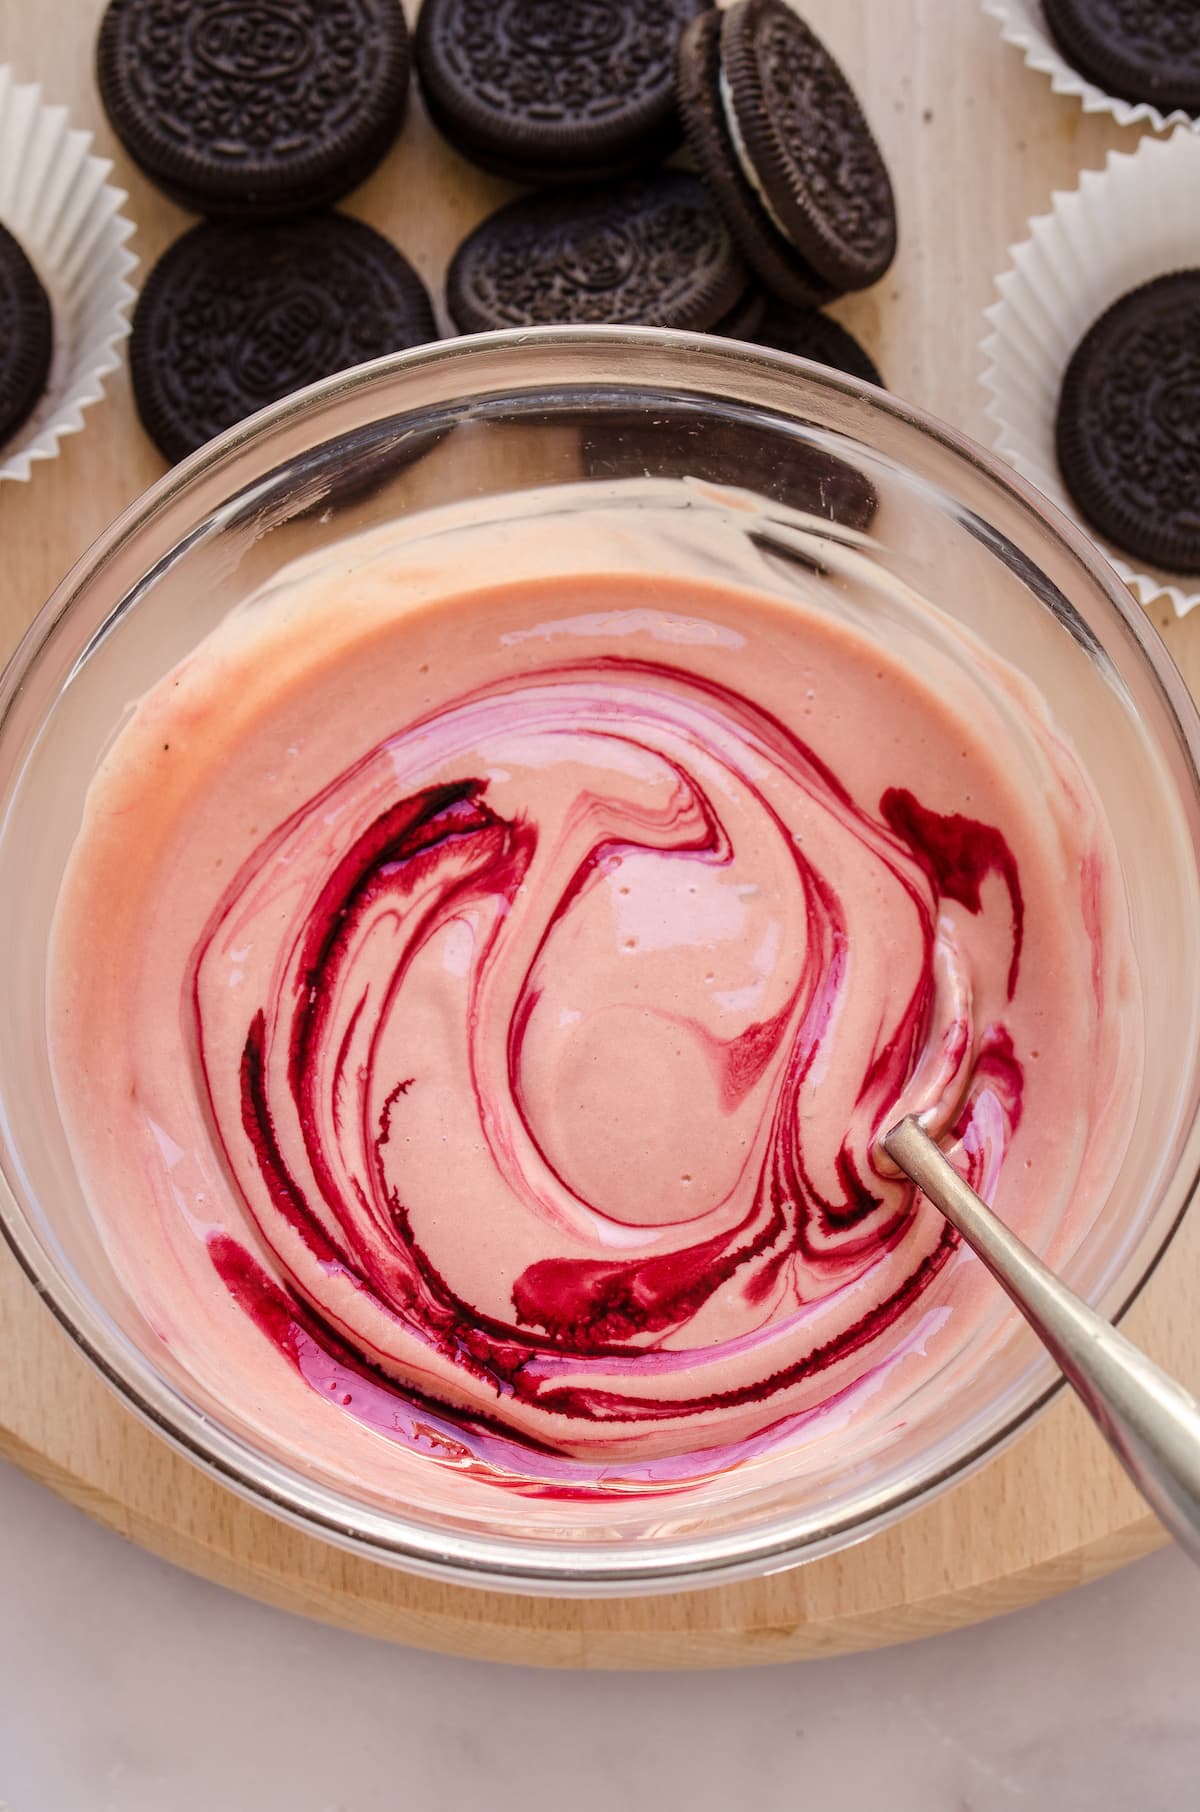 Overhead view of red velvet cheesecake batter in a mixing bowl